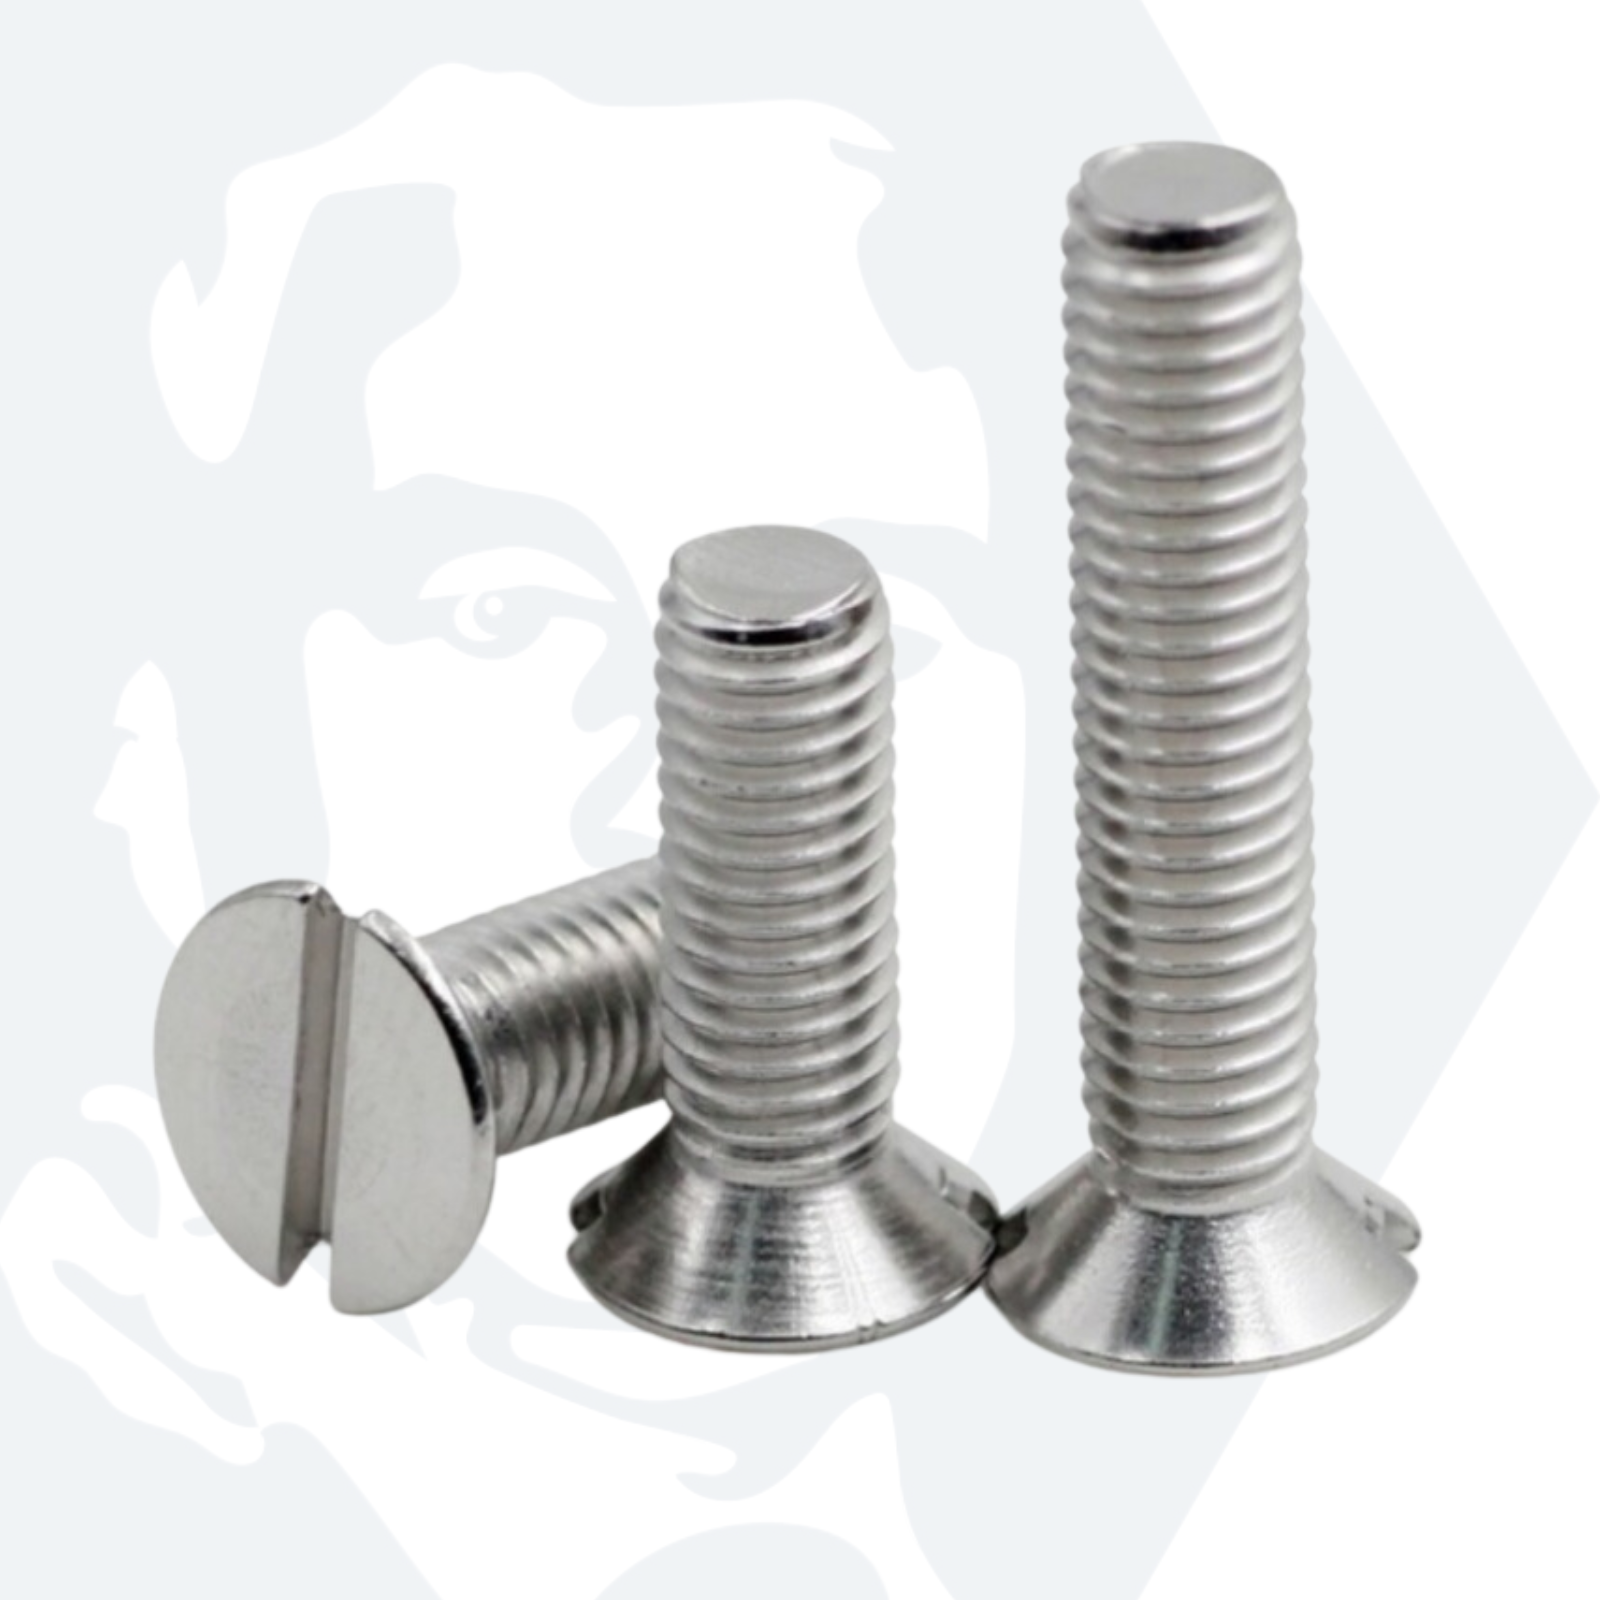 M3 Slotted Countersunk Screws (DIN 963) - Stainless Steel (A2)